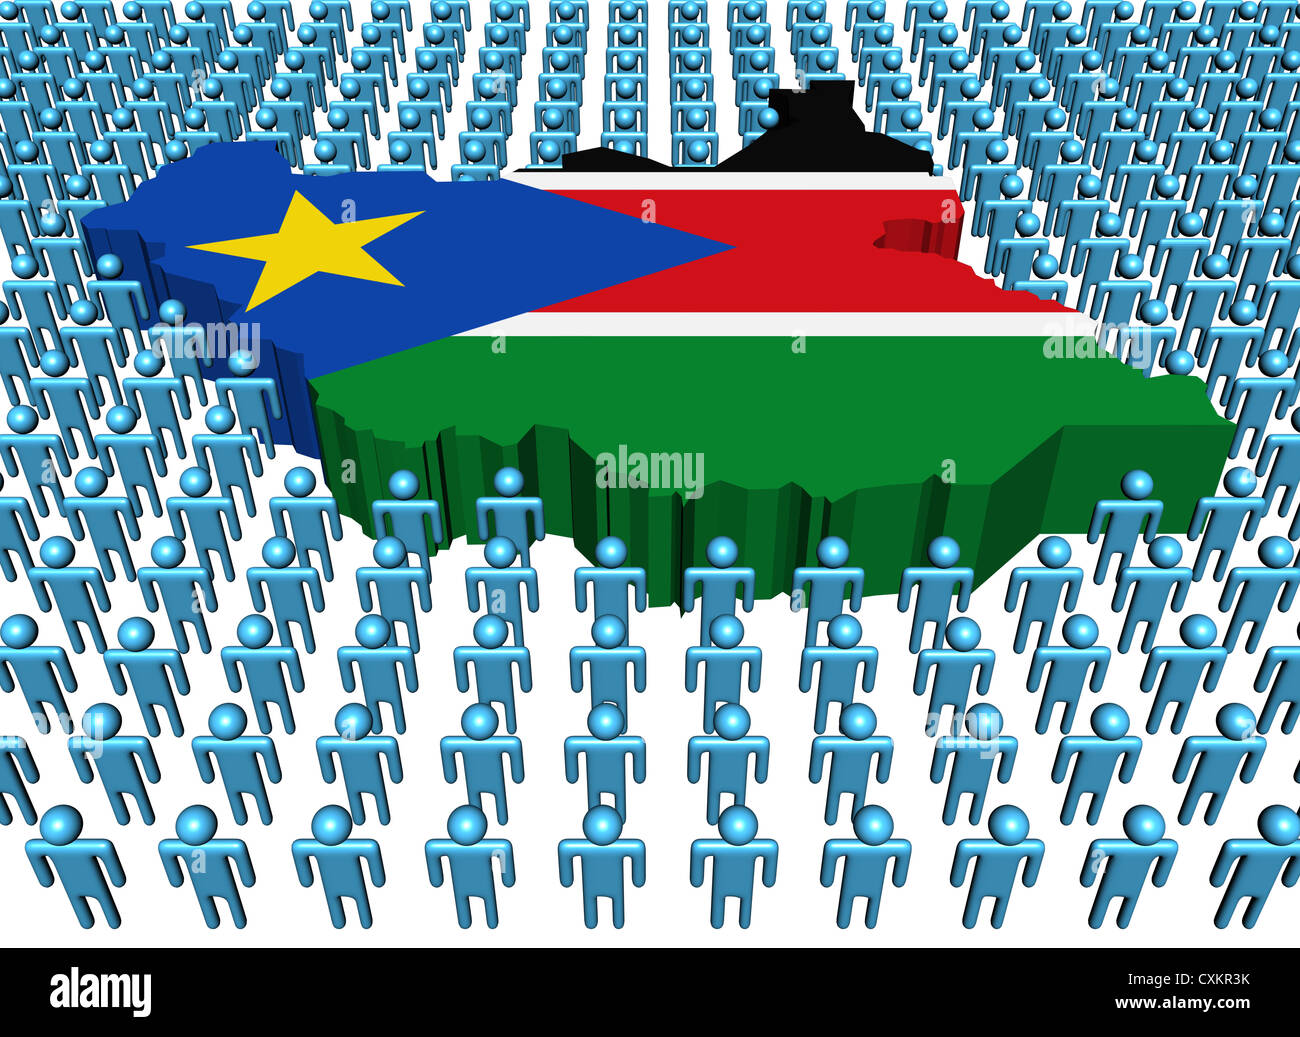 South Sudan map flag surrounded by many abstract people illustration Stock Photo